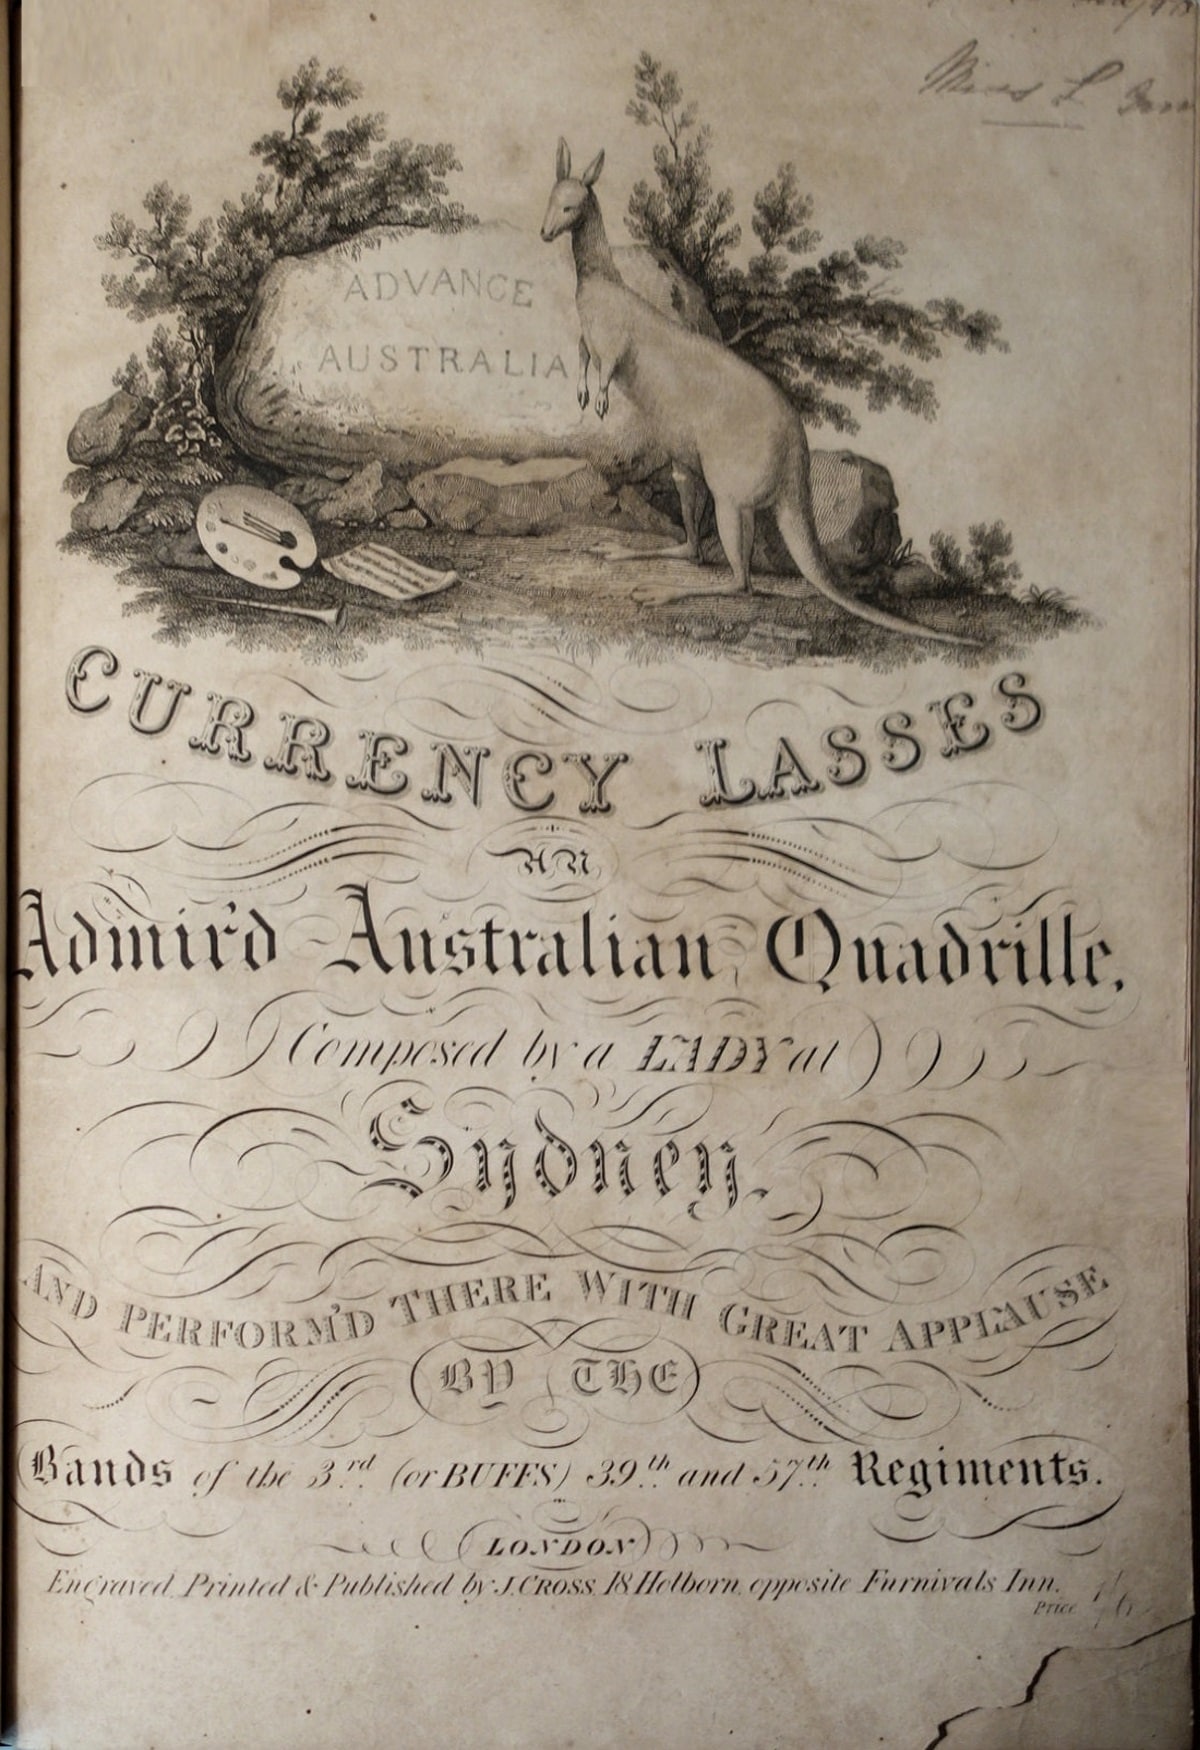 Currency lasses; an admired Australian quadrille, page 1 (cover)